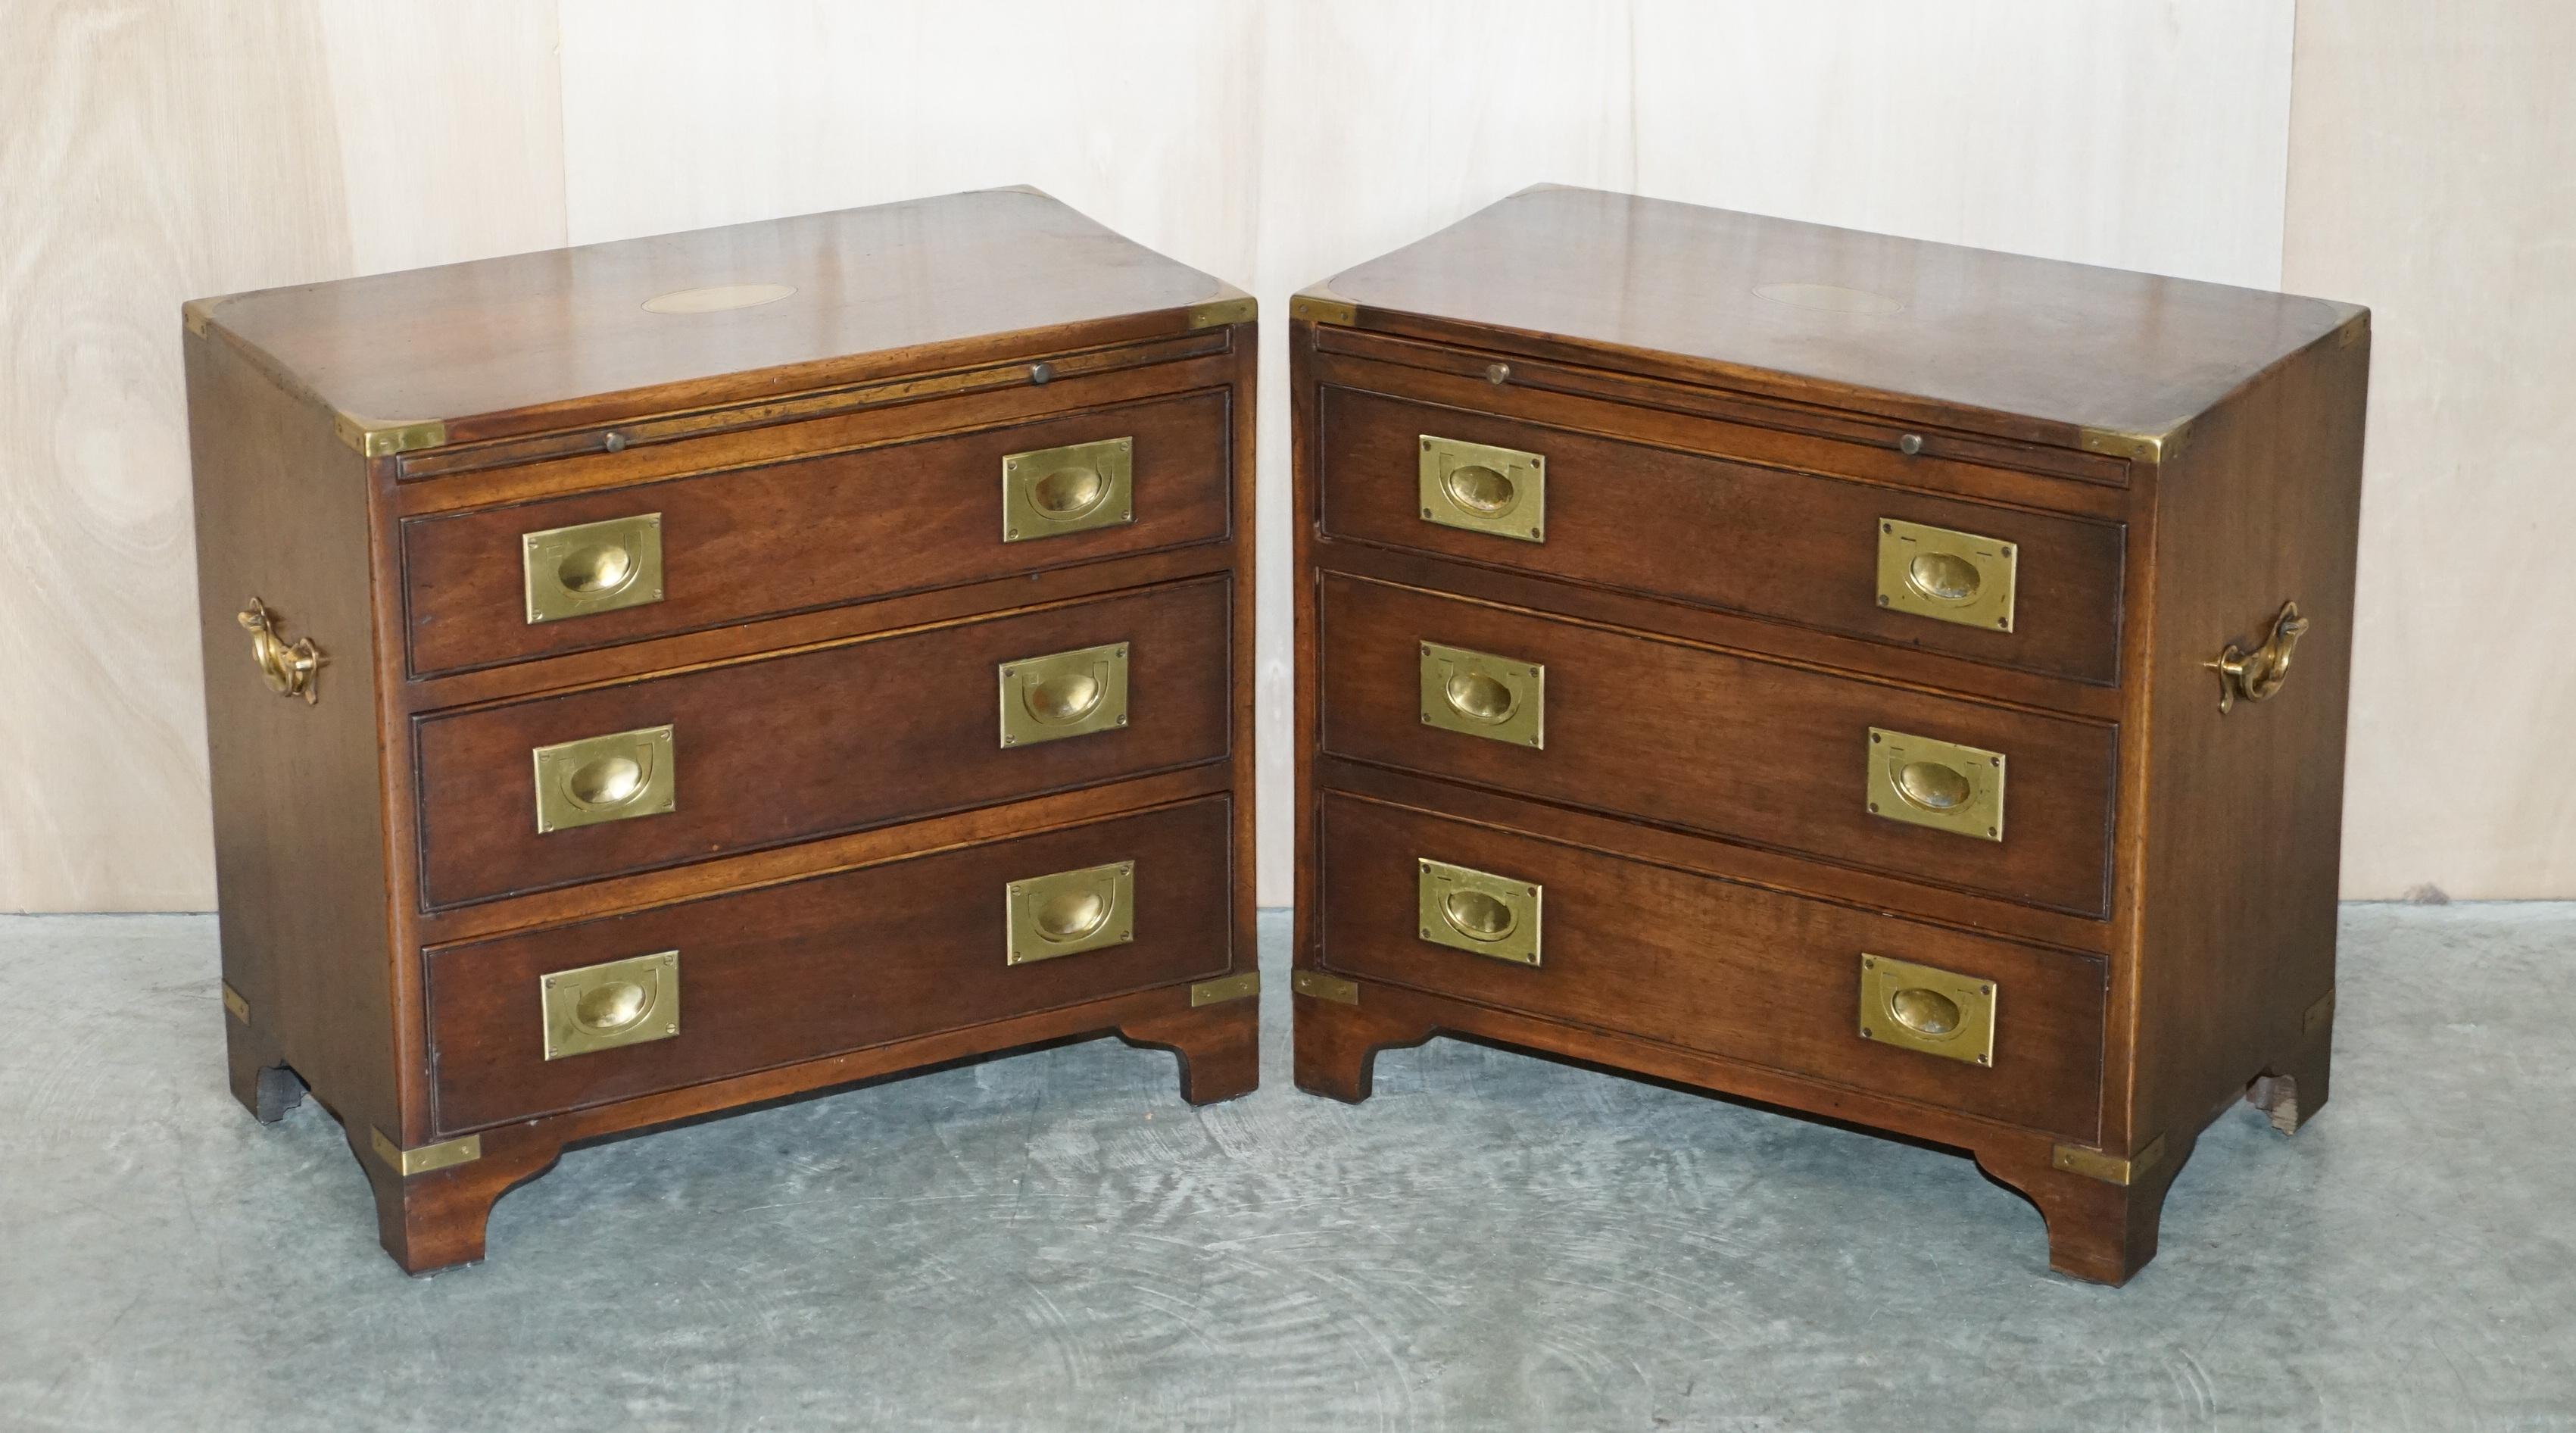 We are delighted to offer for sale this sublime pair of vintage Harrods Kennedy Military Campaign Bachelors chests with butlers serving trays.

A truly stunning and well made pair by Kennedy Furniture and retailed through Harrods London, these are